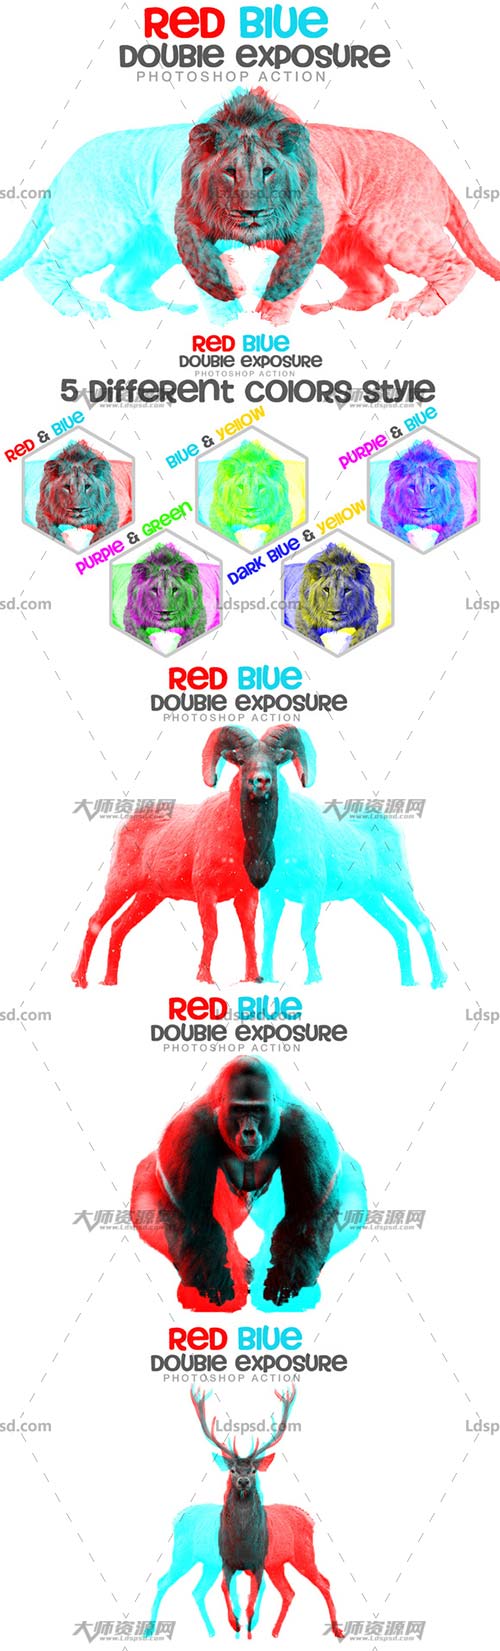 Red blue double exposure,PS动作－红蓝双重曝光